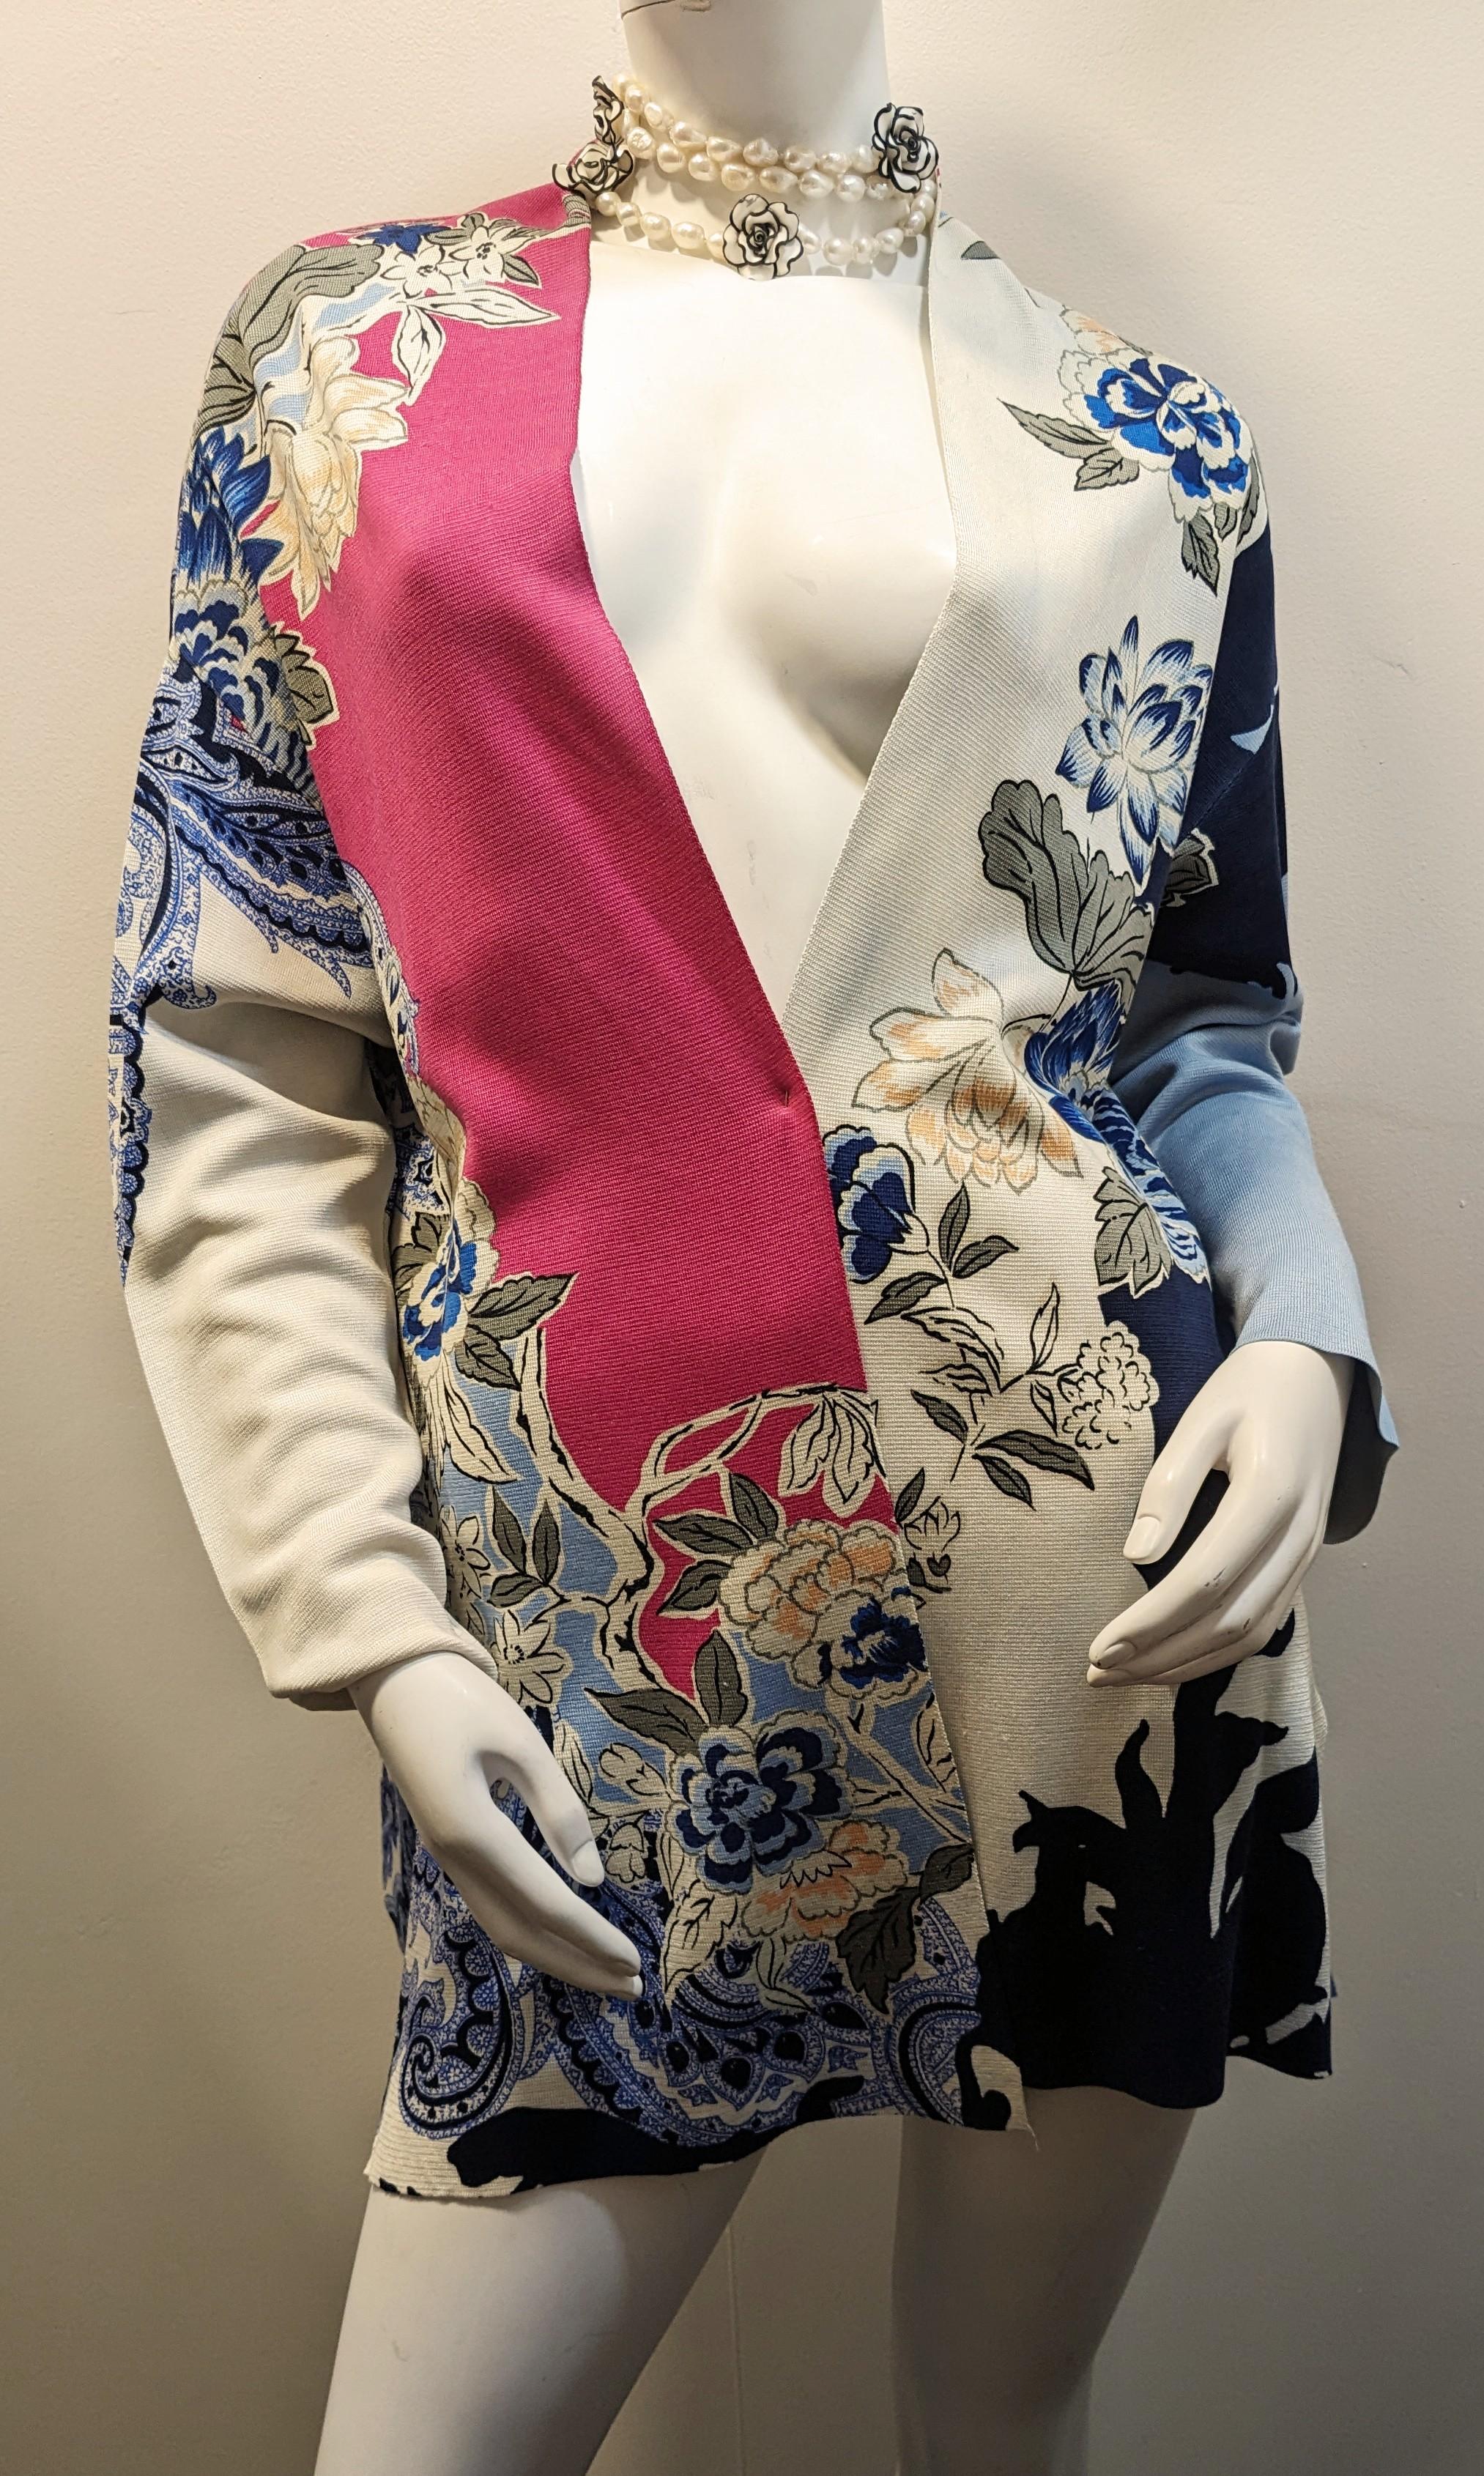 ETRO  Silk Cardigan with Floral Motifs
Silk cardigan in blue and pink tones with front and side openings
Size  44
Length 75 cm
Since its creation in 1968, Etro has managed to keep the fashion world on edge with its now inseparable paisley prints.